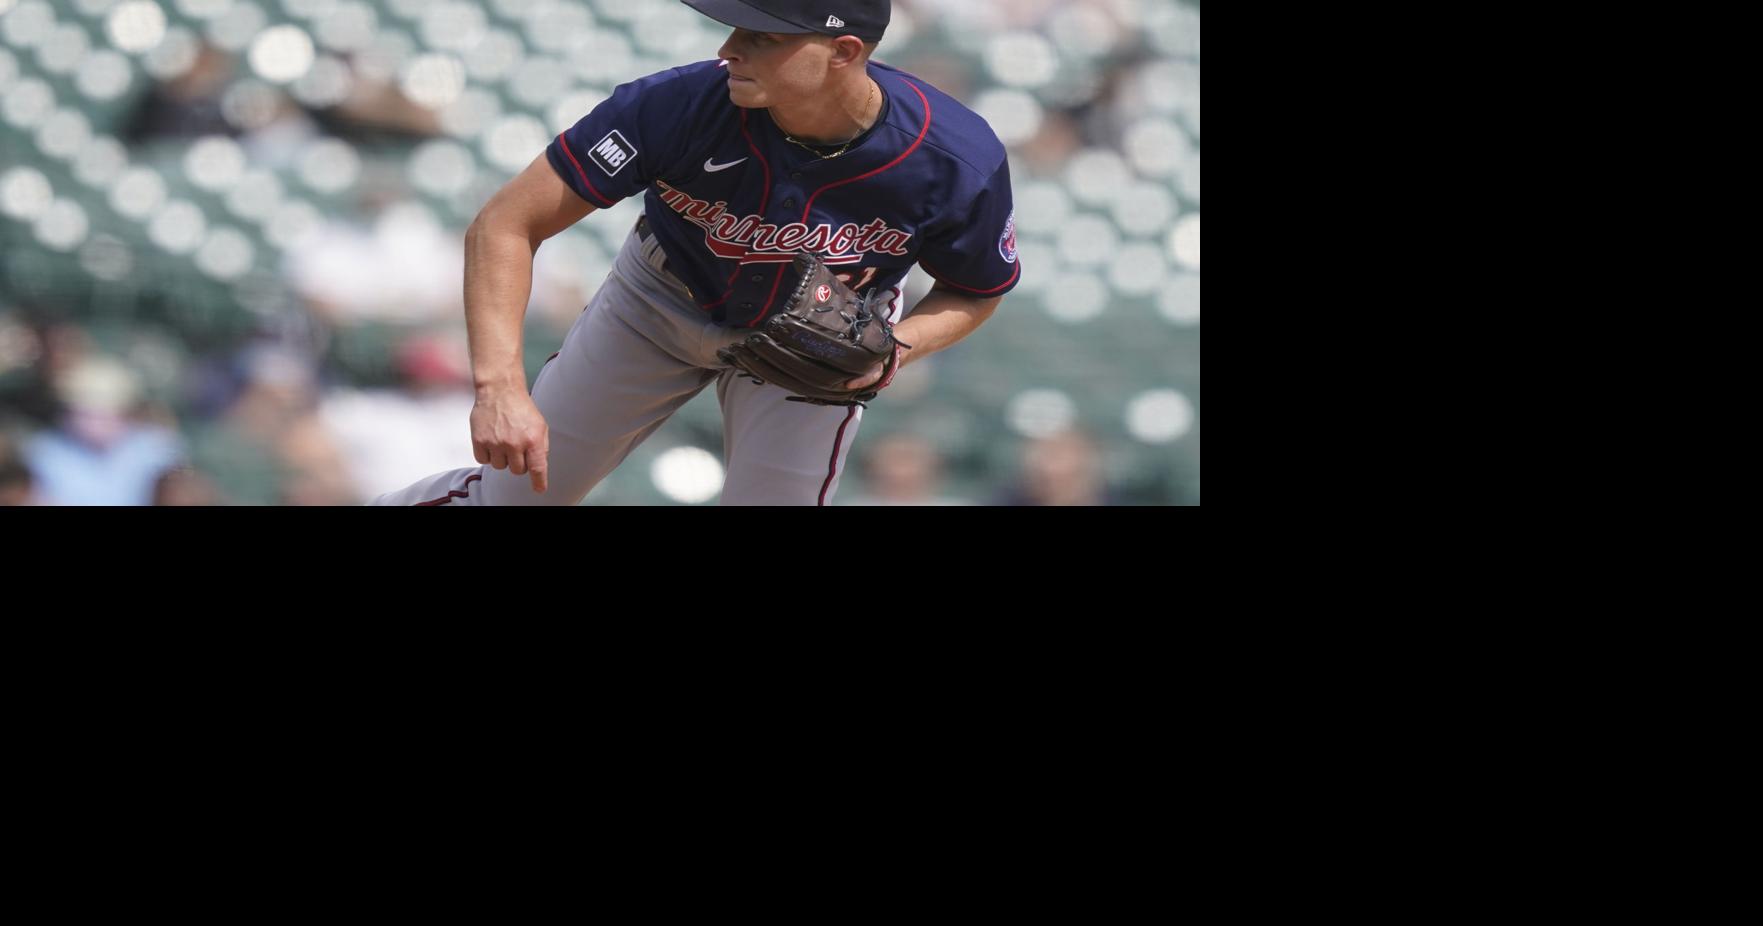 Cody Stashak update: Strikes out only batter he faces to get Twins out of  jam